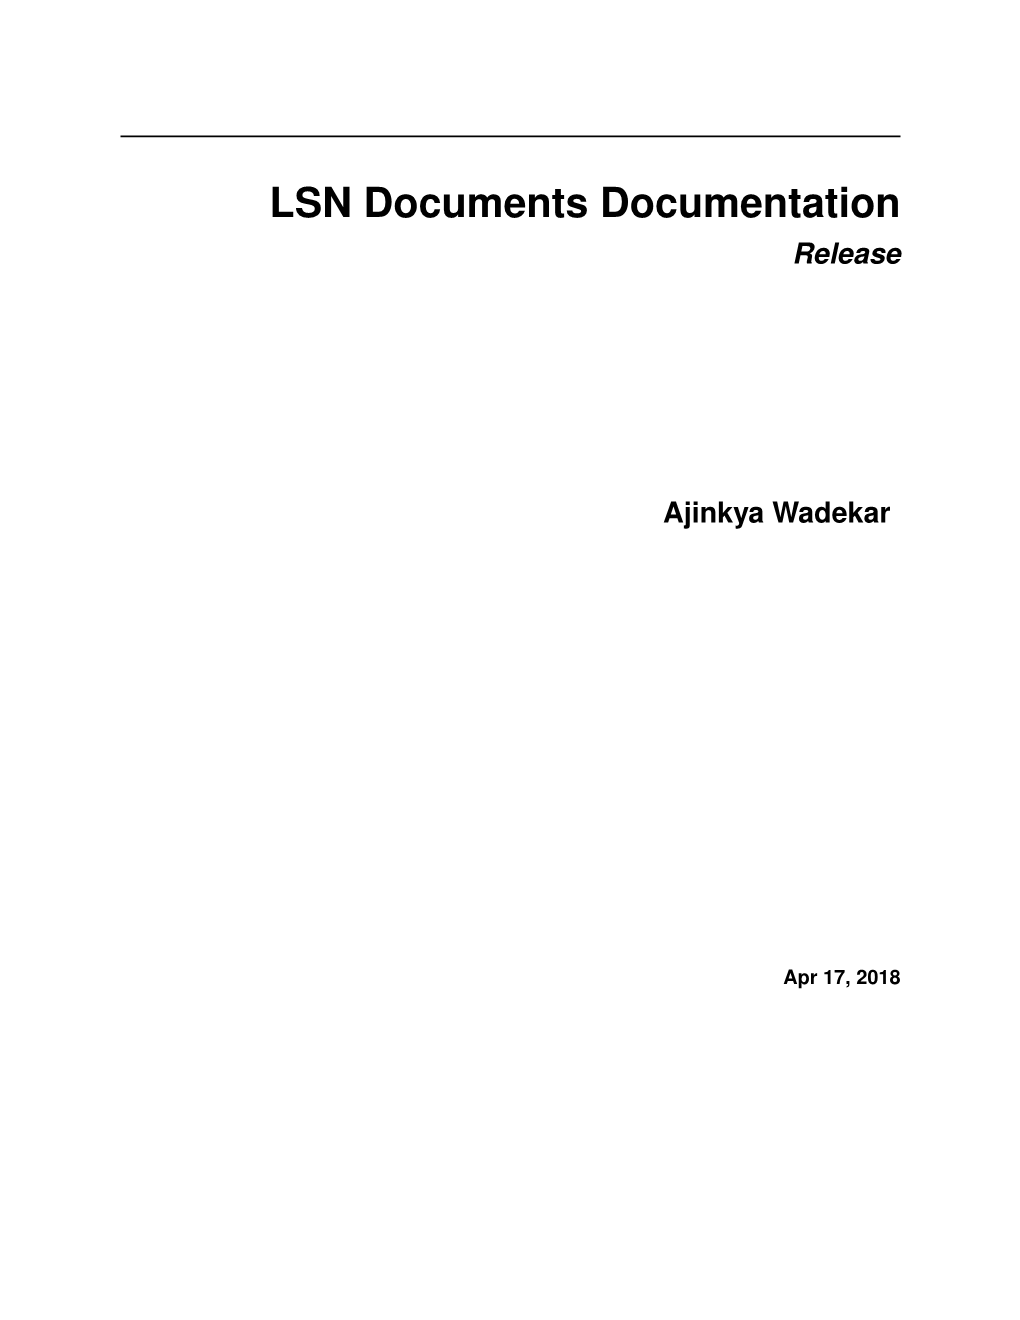 LSN Documents Documentation Release